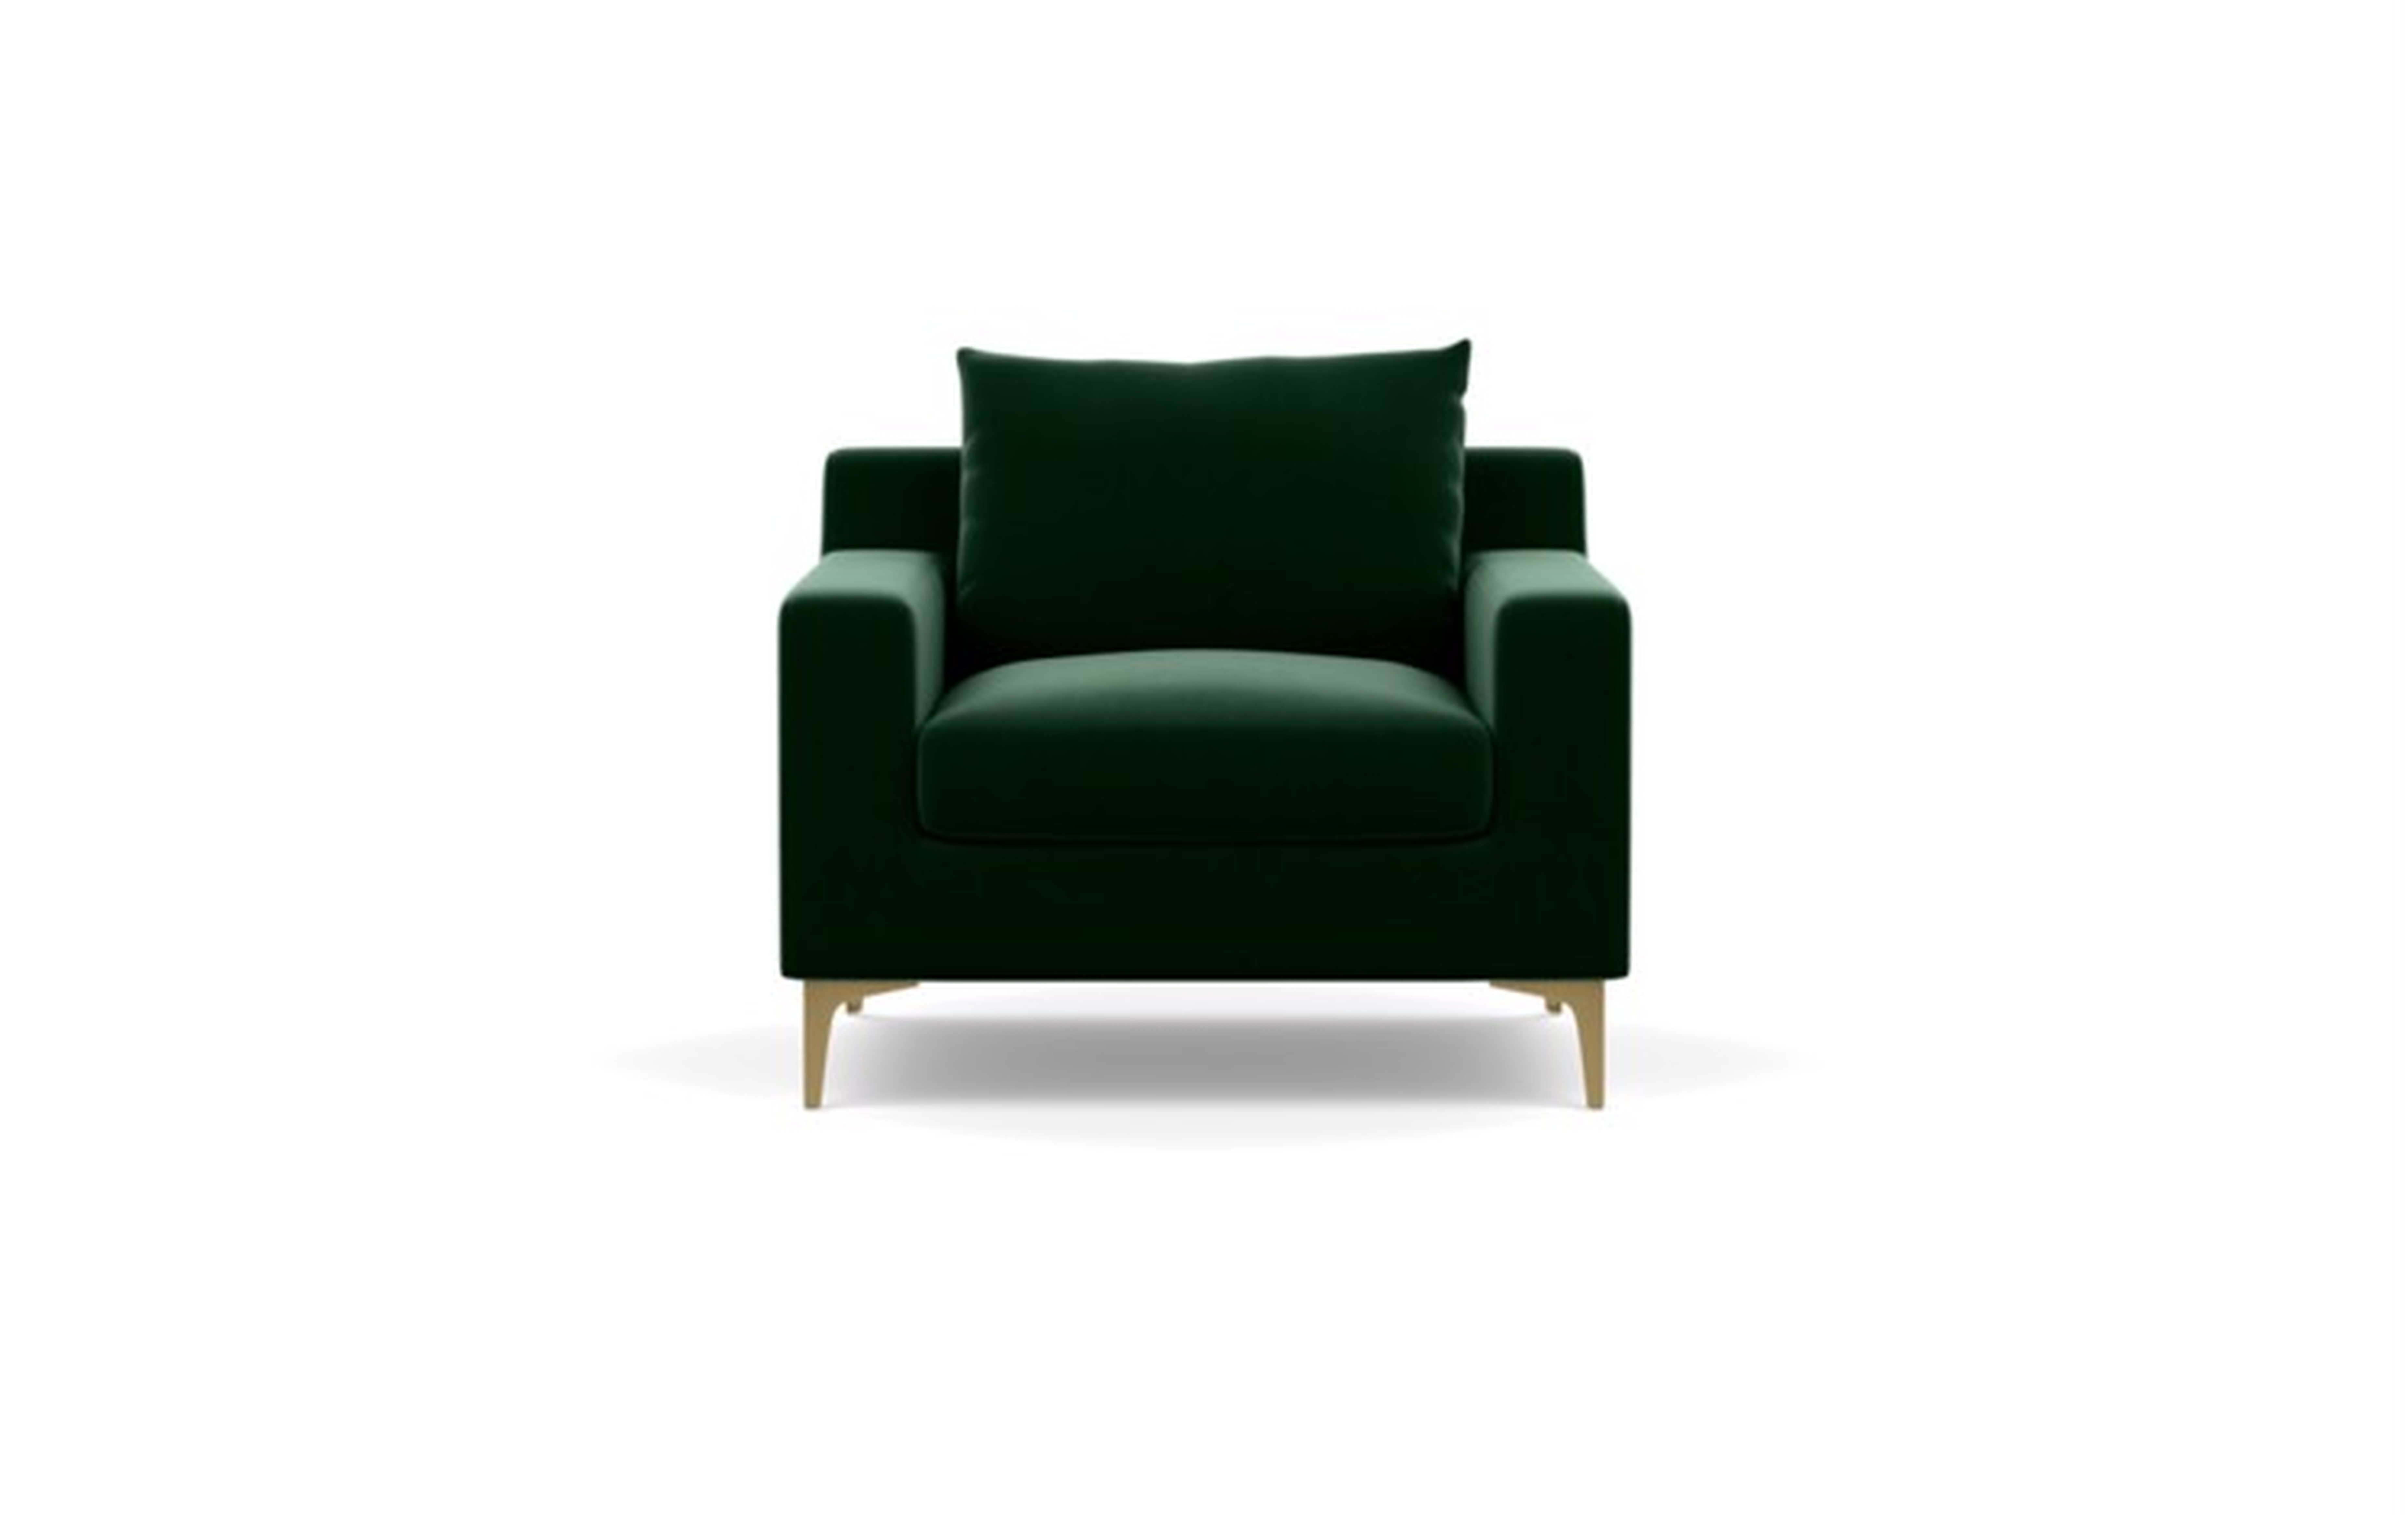 Sloan Chairs in Emerald Fabric with Brass Plated legs - Interior Define